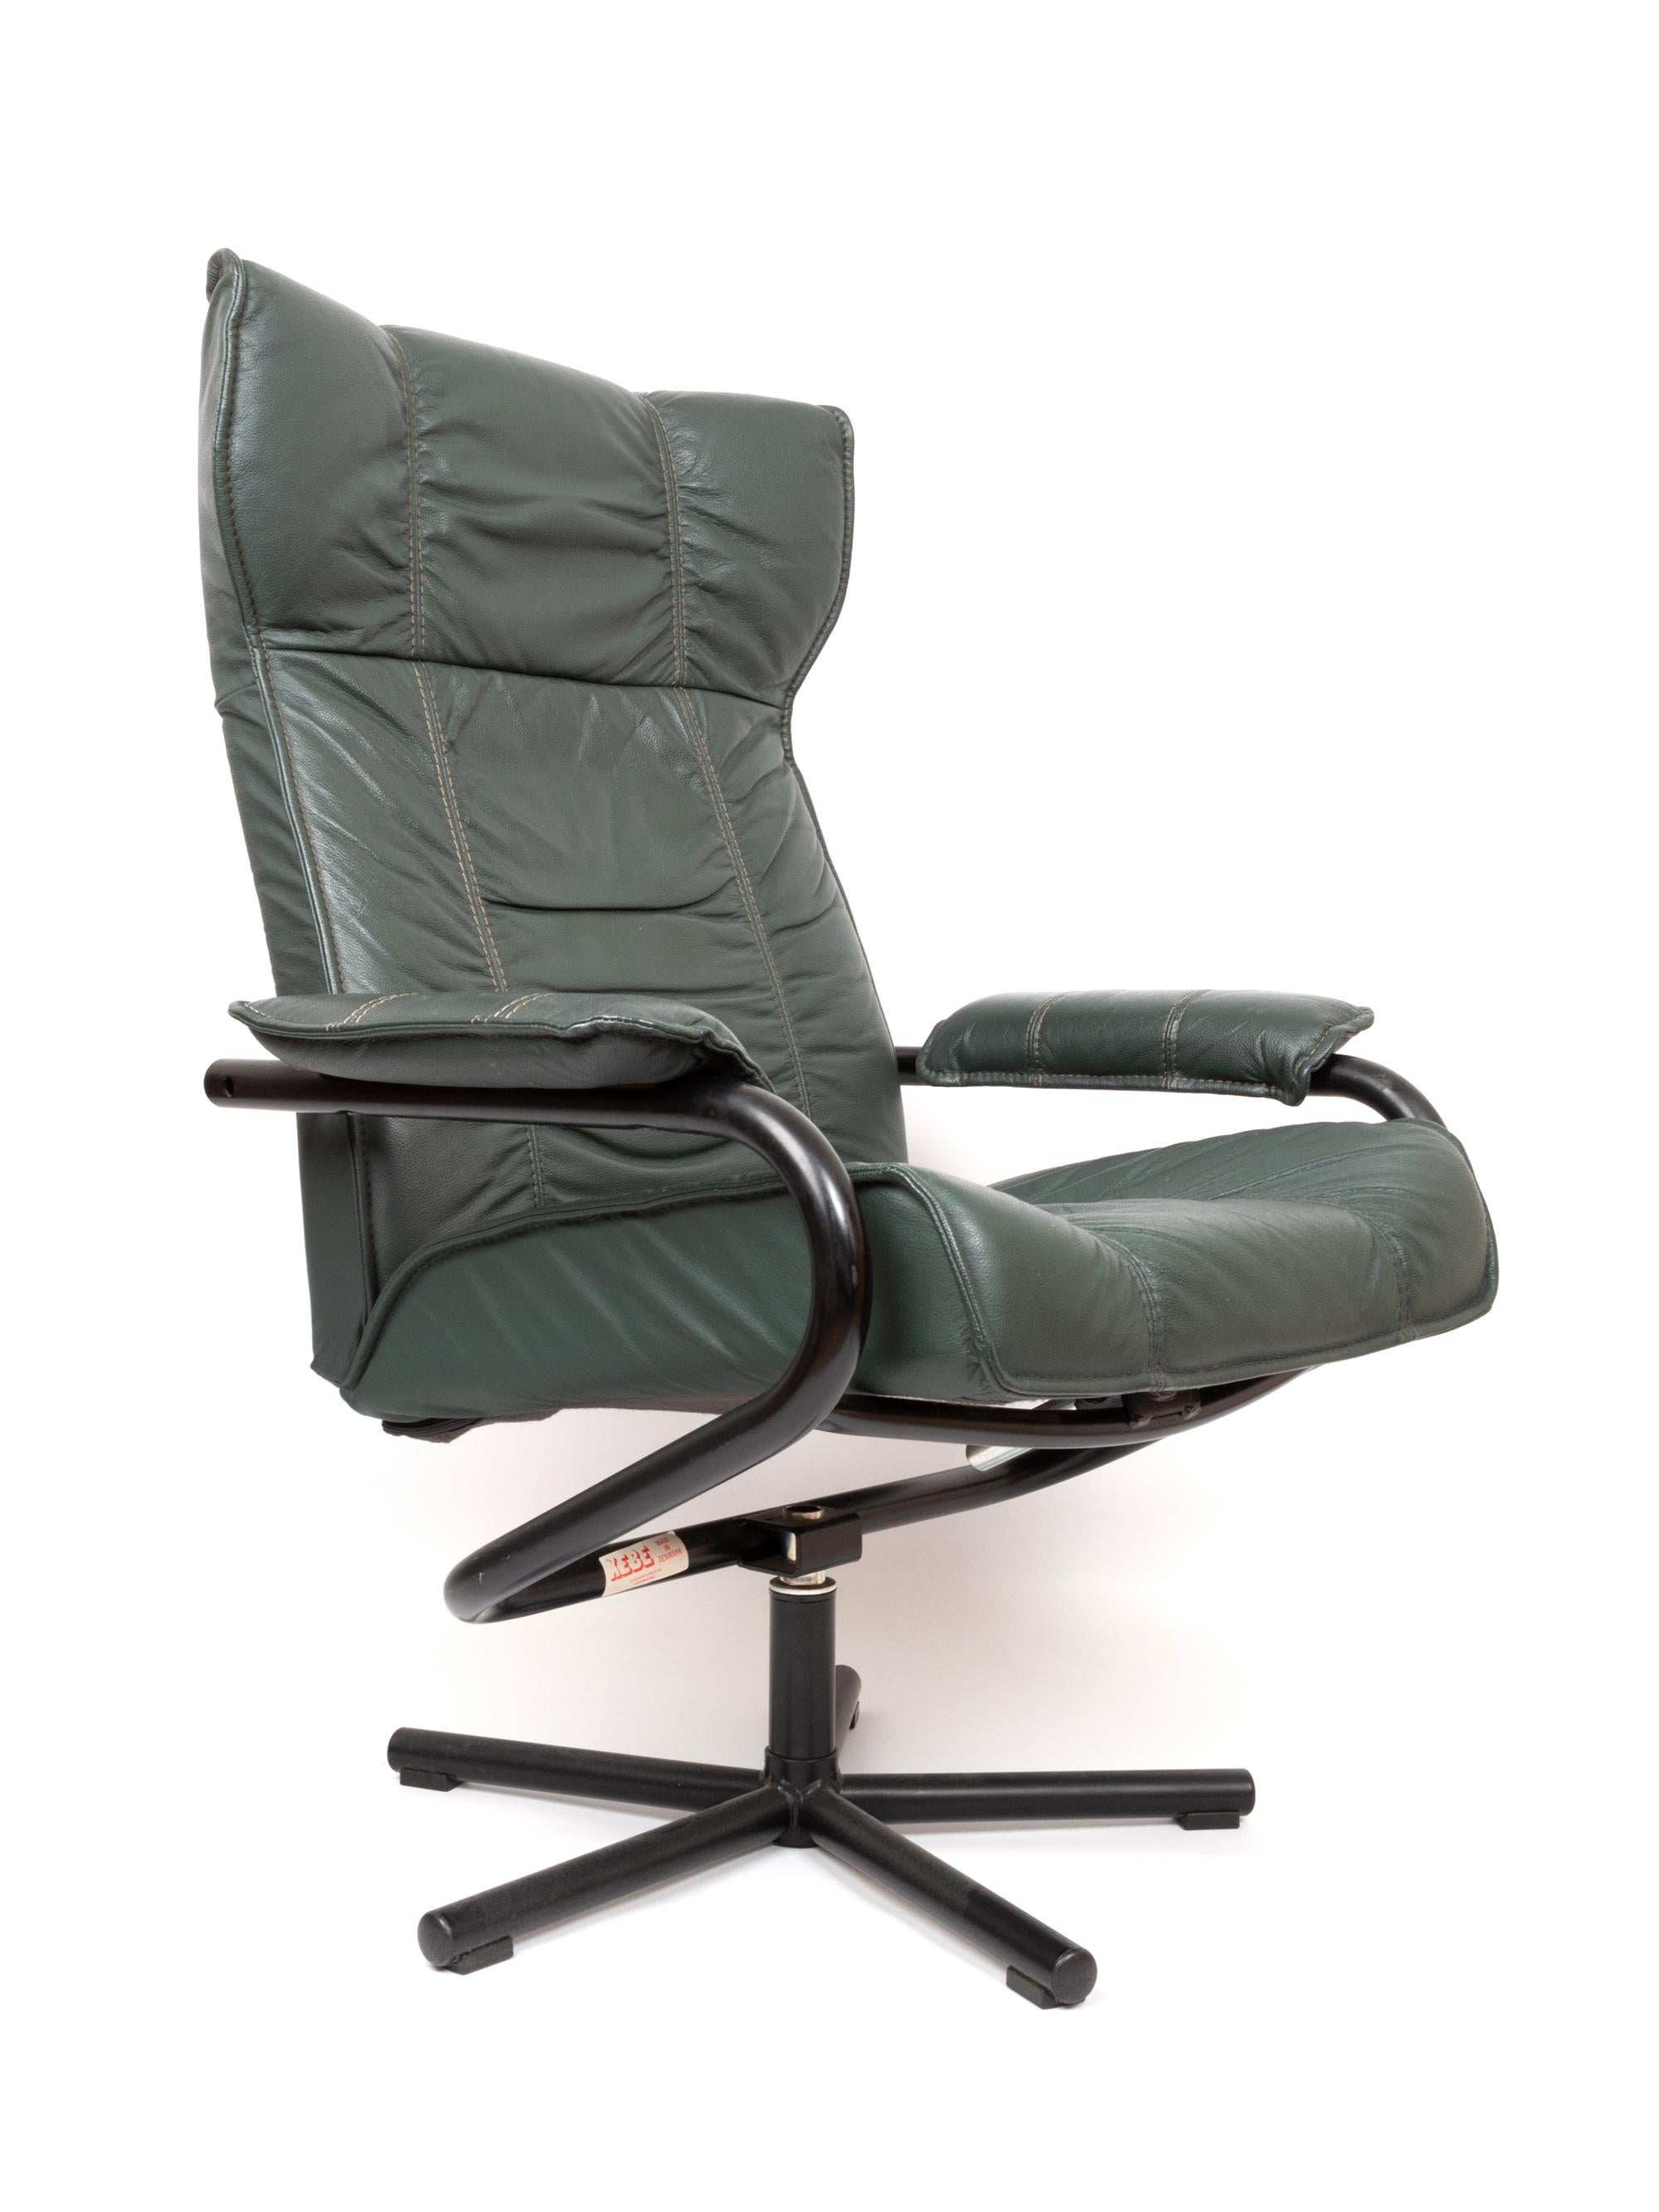 Danish Leather Recliner Swivel Lounge Chair by Kebe, Denmark, circa 1970 1